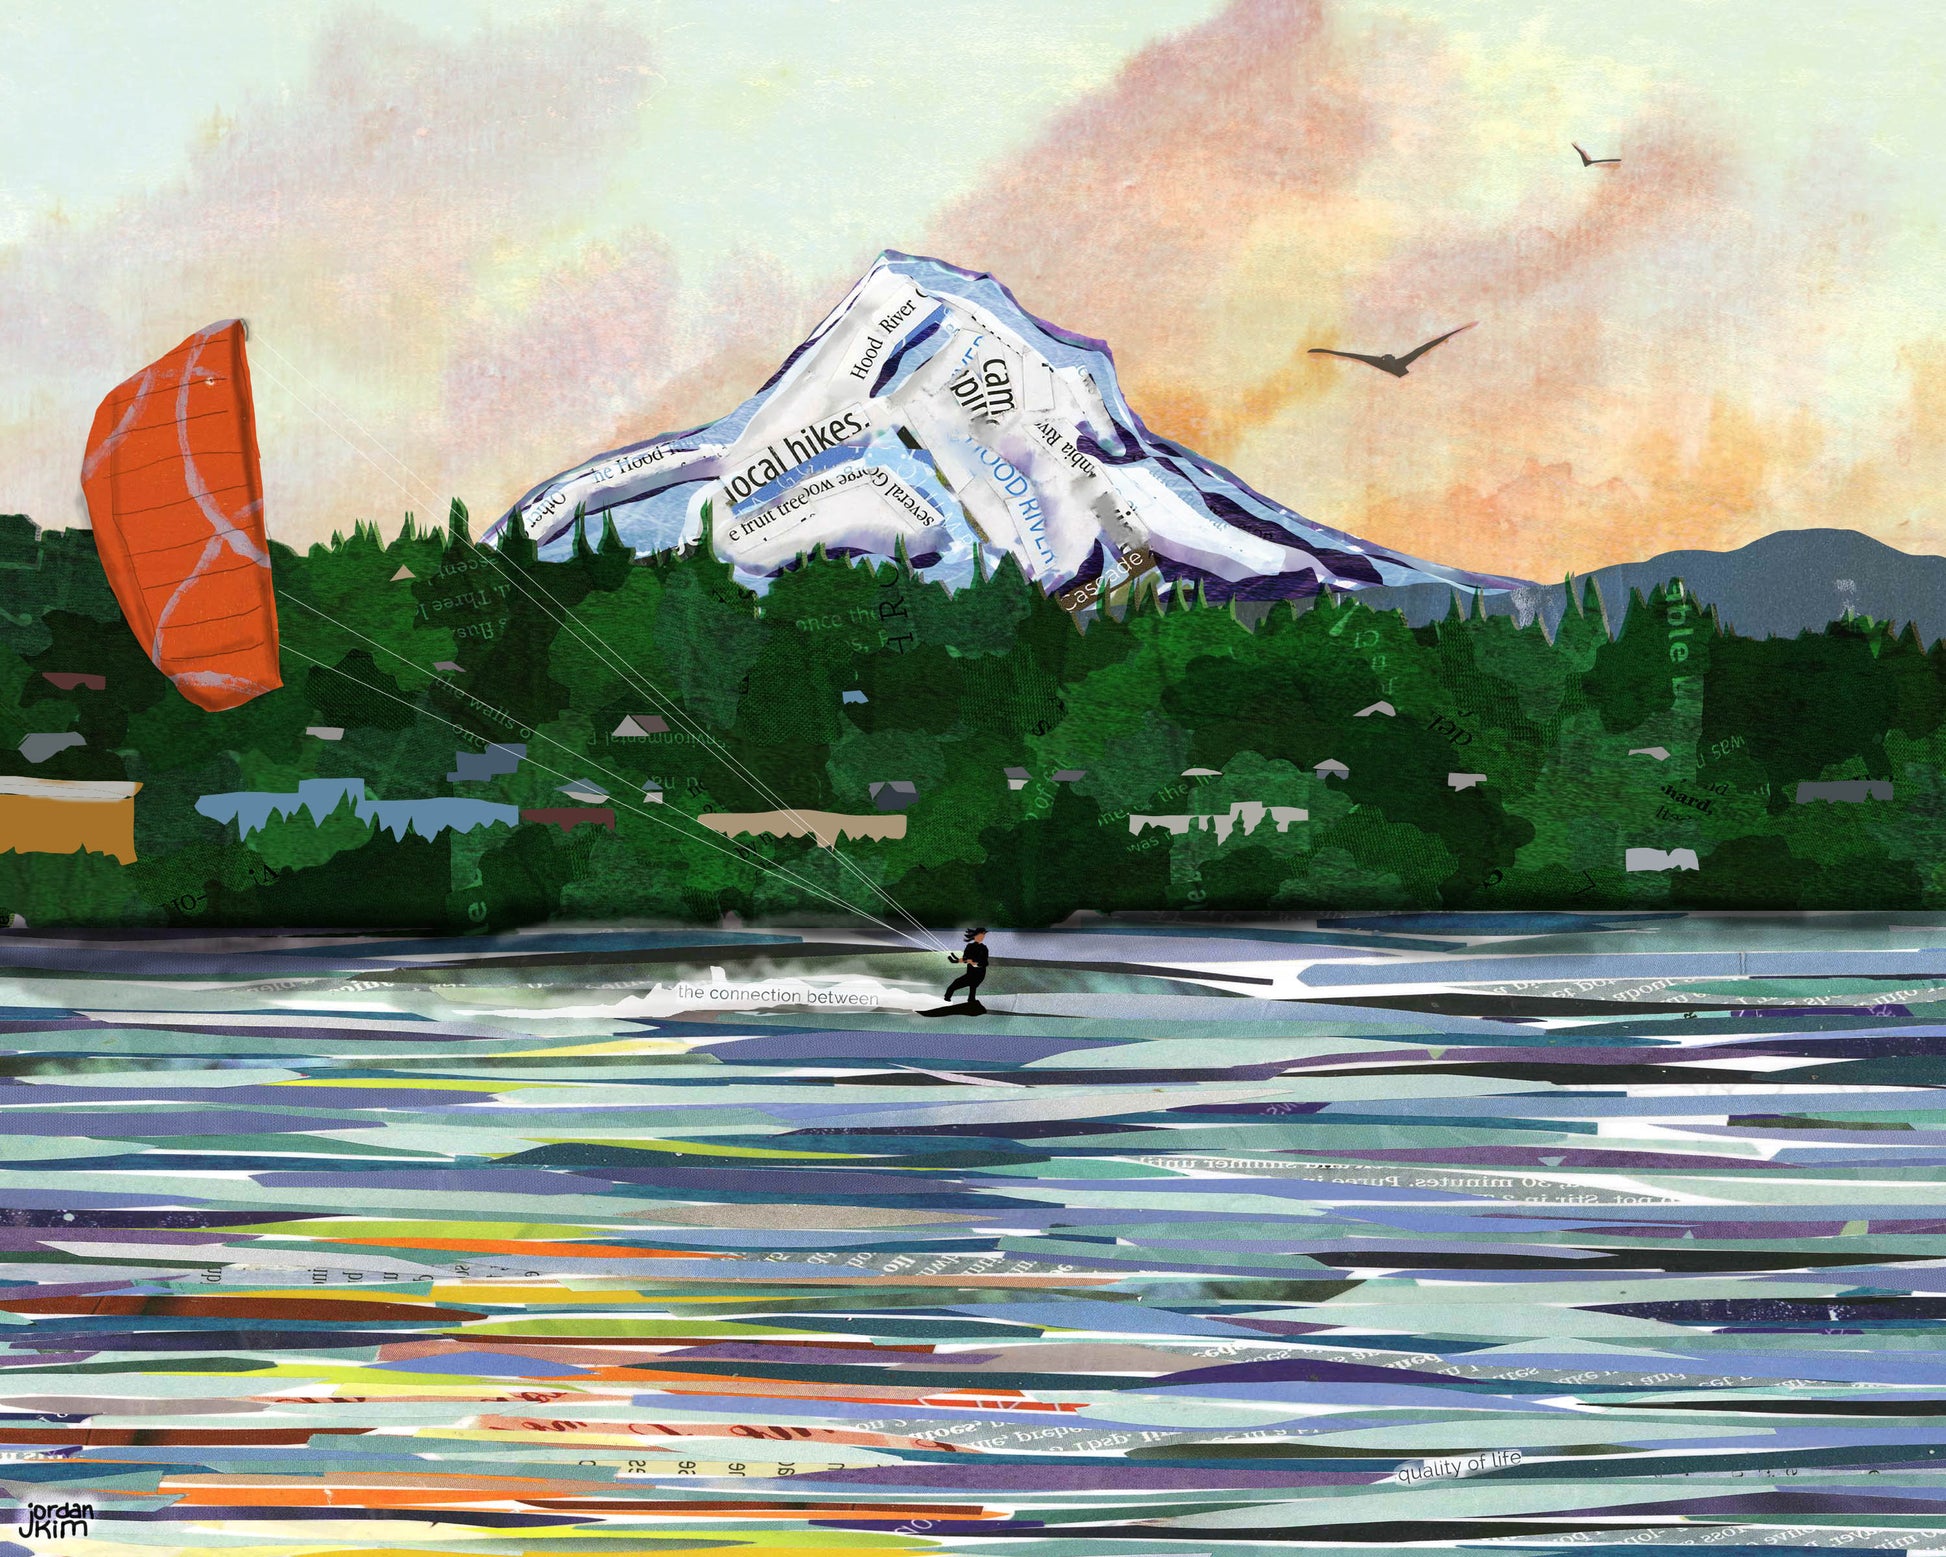 Greeting Card of mixed media collage of a person kite boarding on the Columbia River in Hood River, Oregon, Mt. Hood - Blank Inside